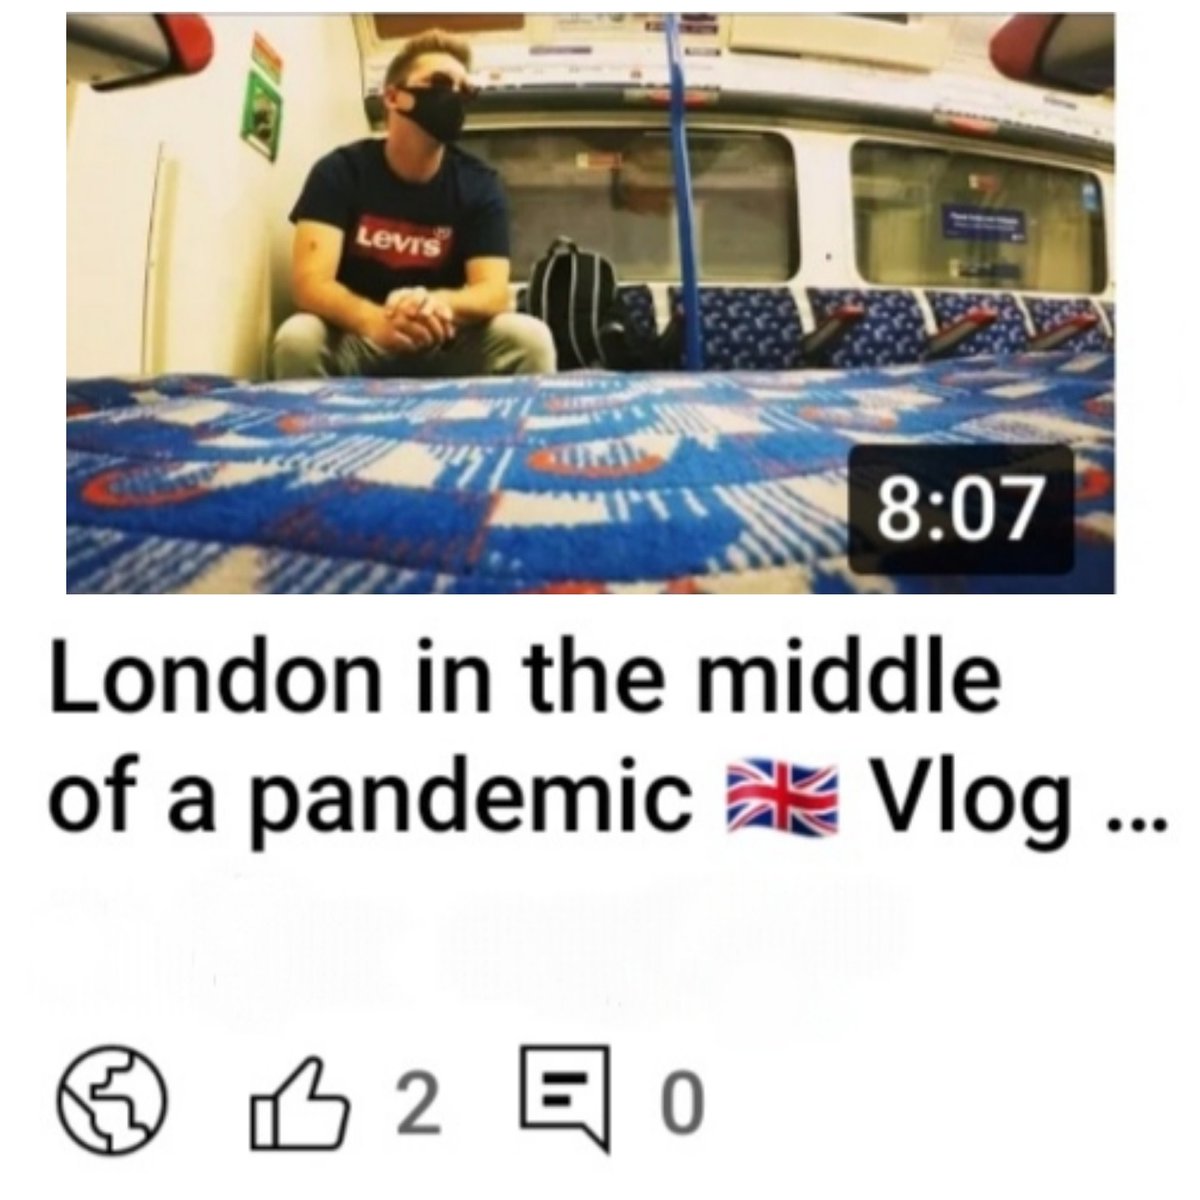 I'm Taking It Back To The Beguining Of My Vlogs Today
Why Not Have A Watch IfYour Coming To London, Looking For London Tours,Or Simply Just Sat On The Toilet Bord
youtu.be/Ew8lGTxx2yk
#firstvlog #backtothebeginning #londonvlog #exploringlondon #youtubevlogger #londontourguide